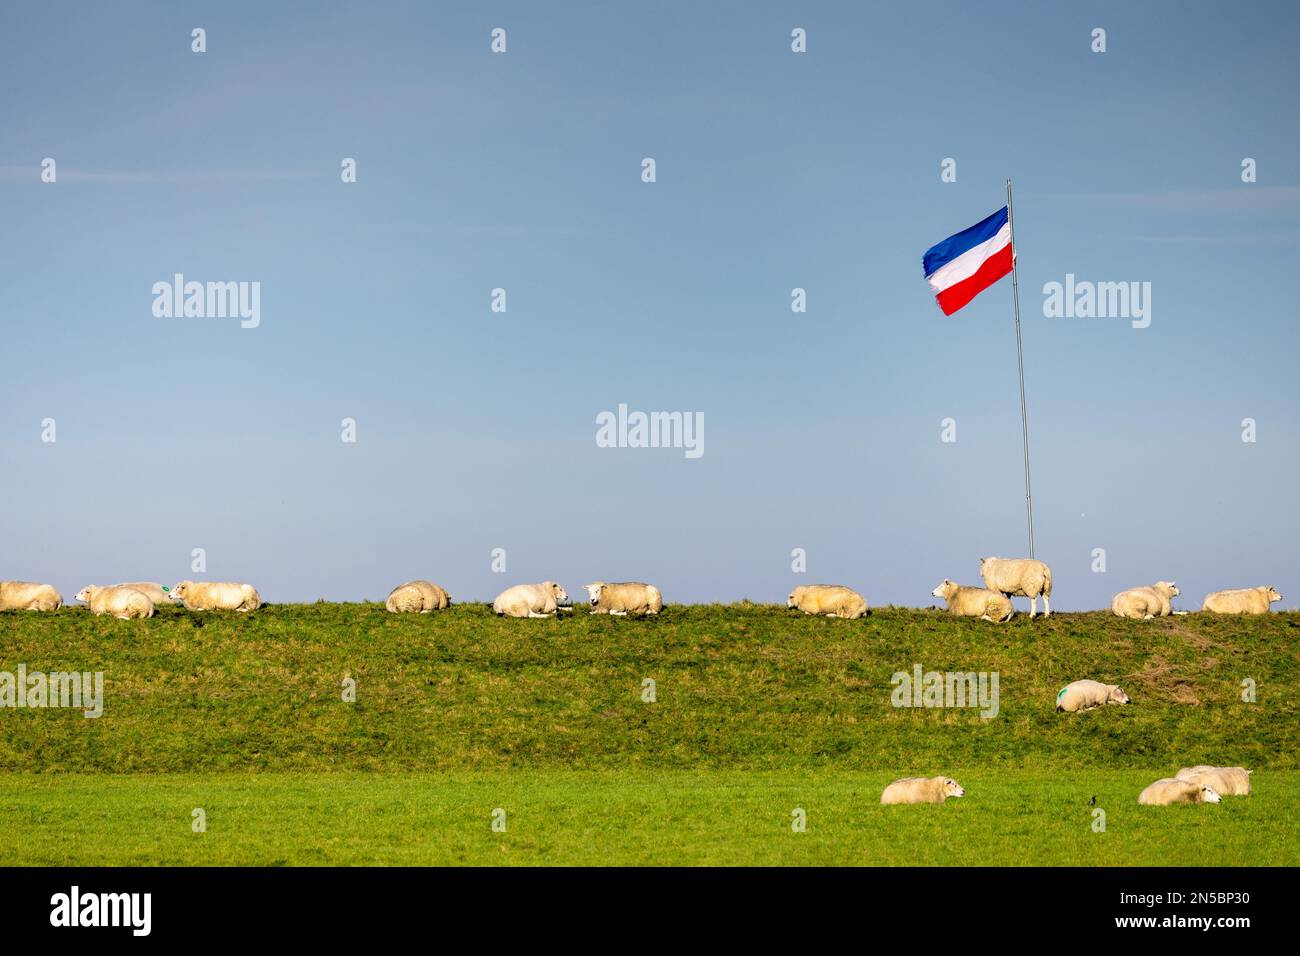 farmers protest against EU agricultural policy, flag hangs upside down, Netherlands, Frisia, NSG Buitendijks, Ferwert Stock Photo